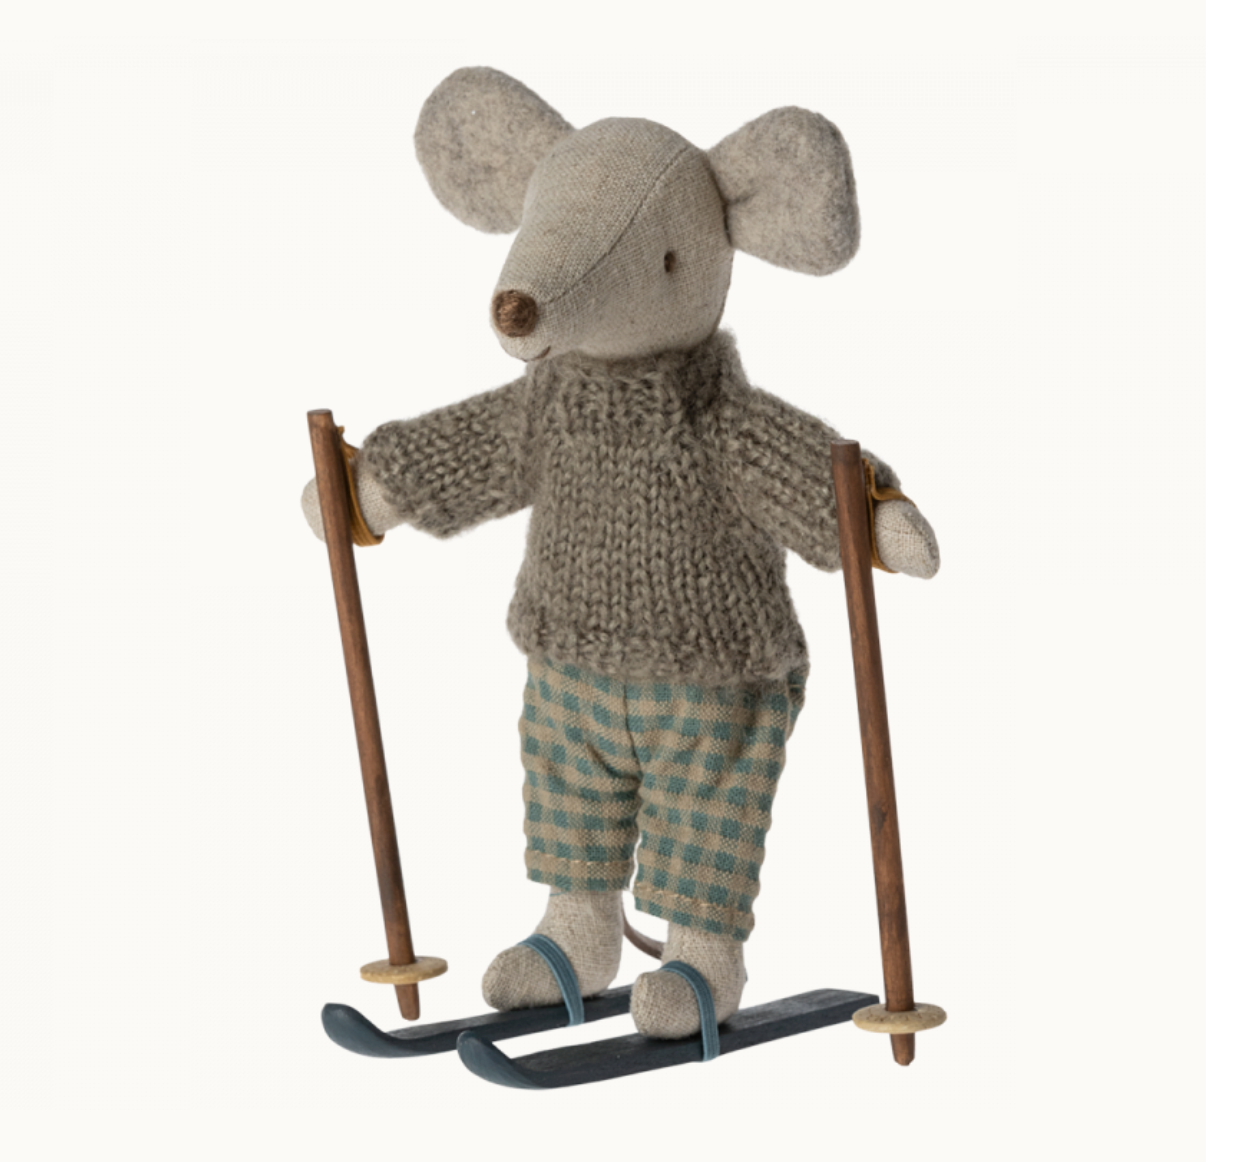 Winter mouse with ski set, Big brother by Maileg